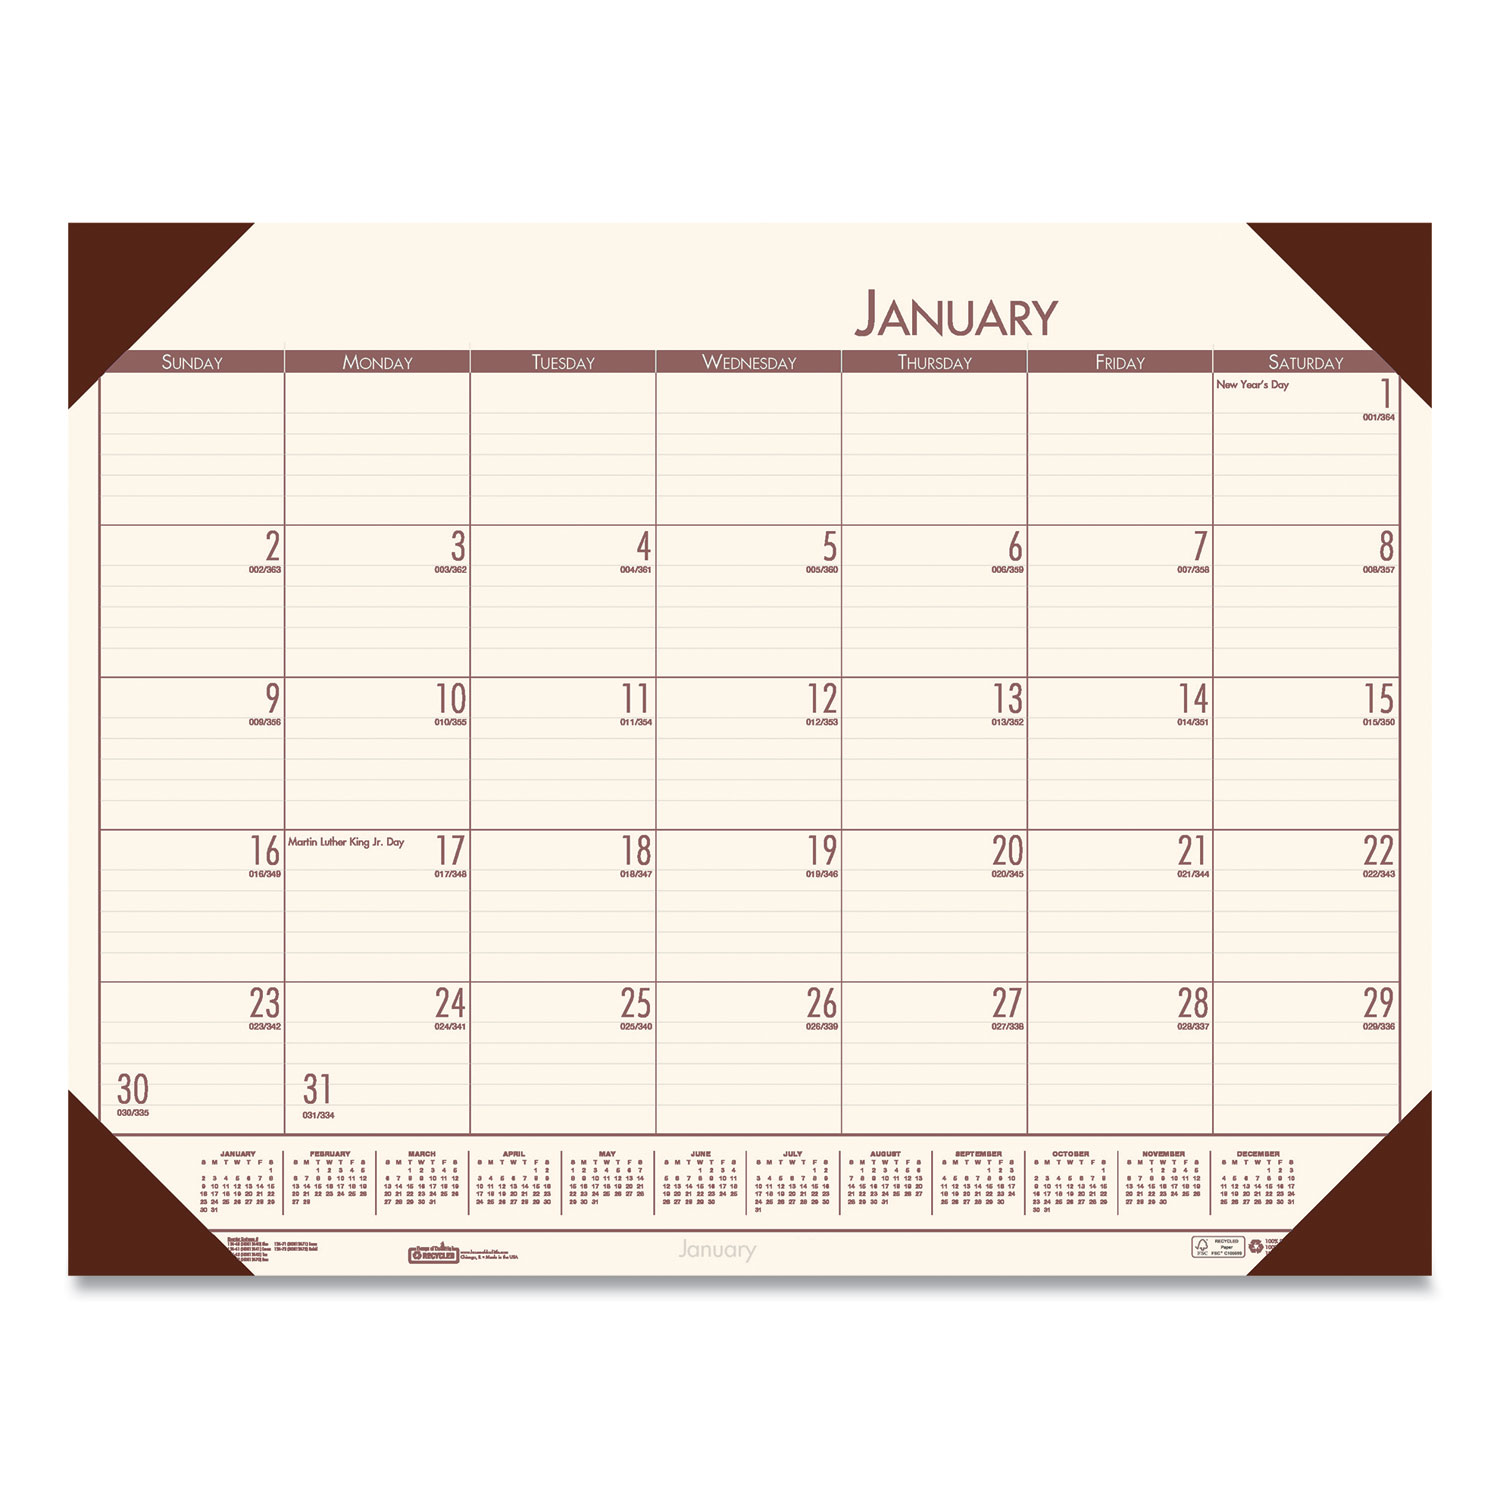 ecotones-recycled-monthly-desk-pad-calendar-22-x-17-moonlight-cream-sheets-brown-corners-12